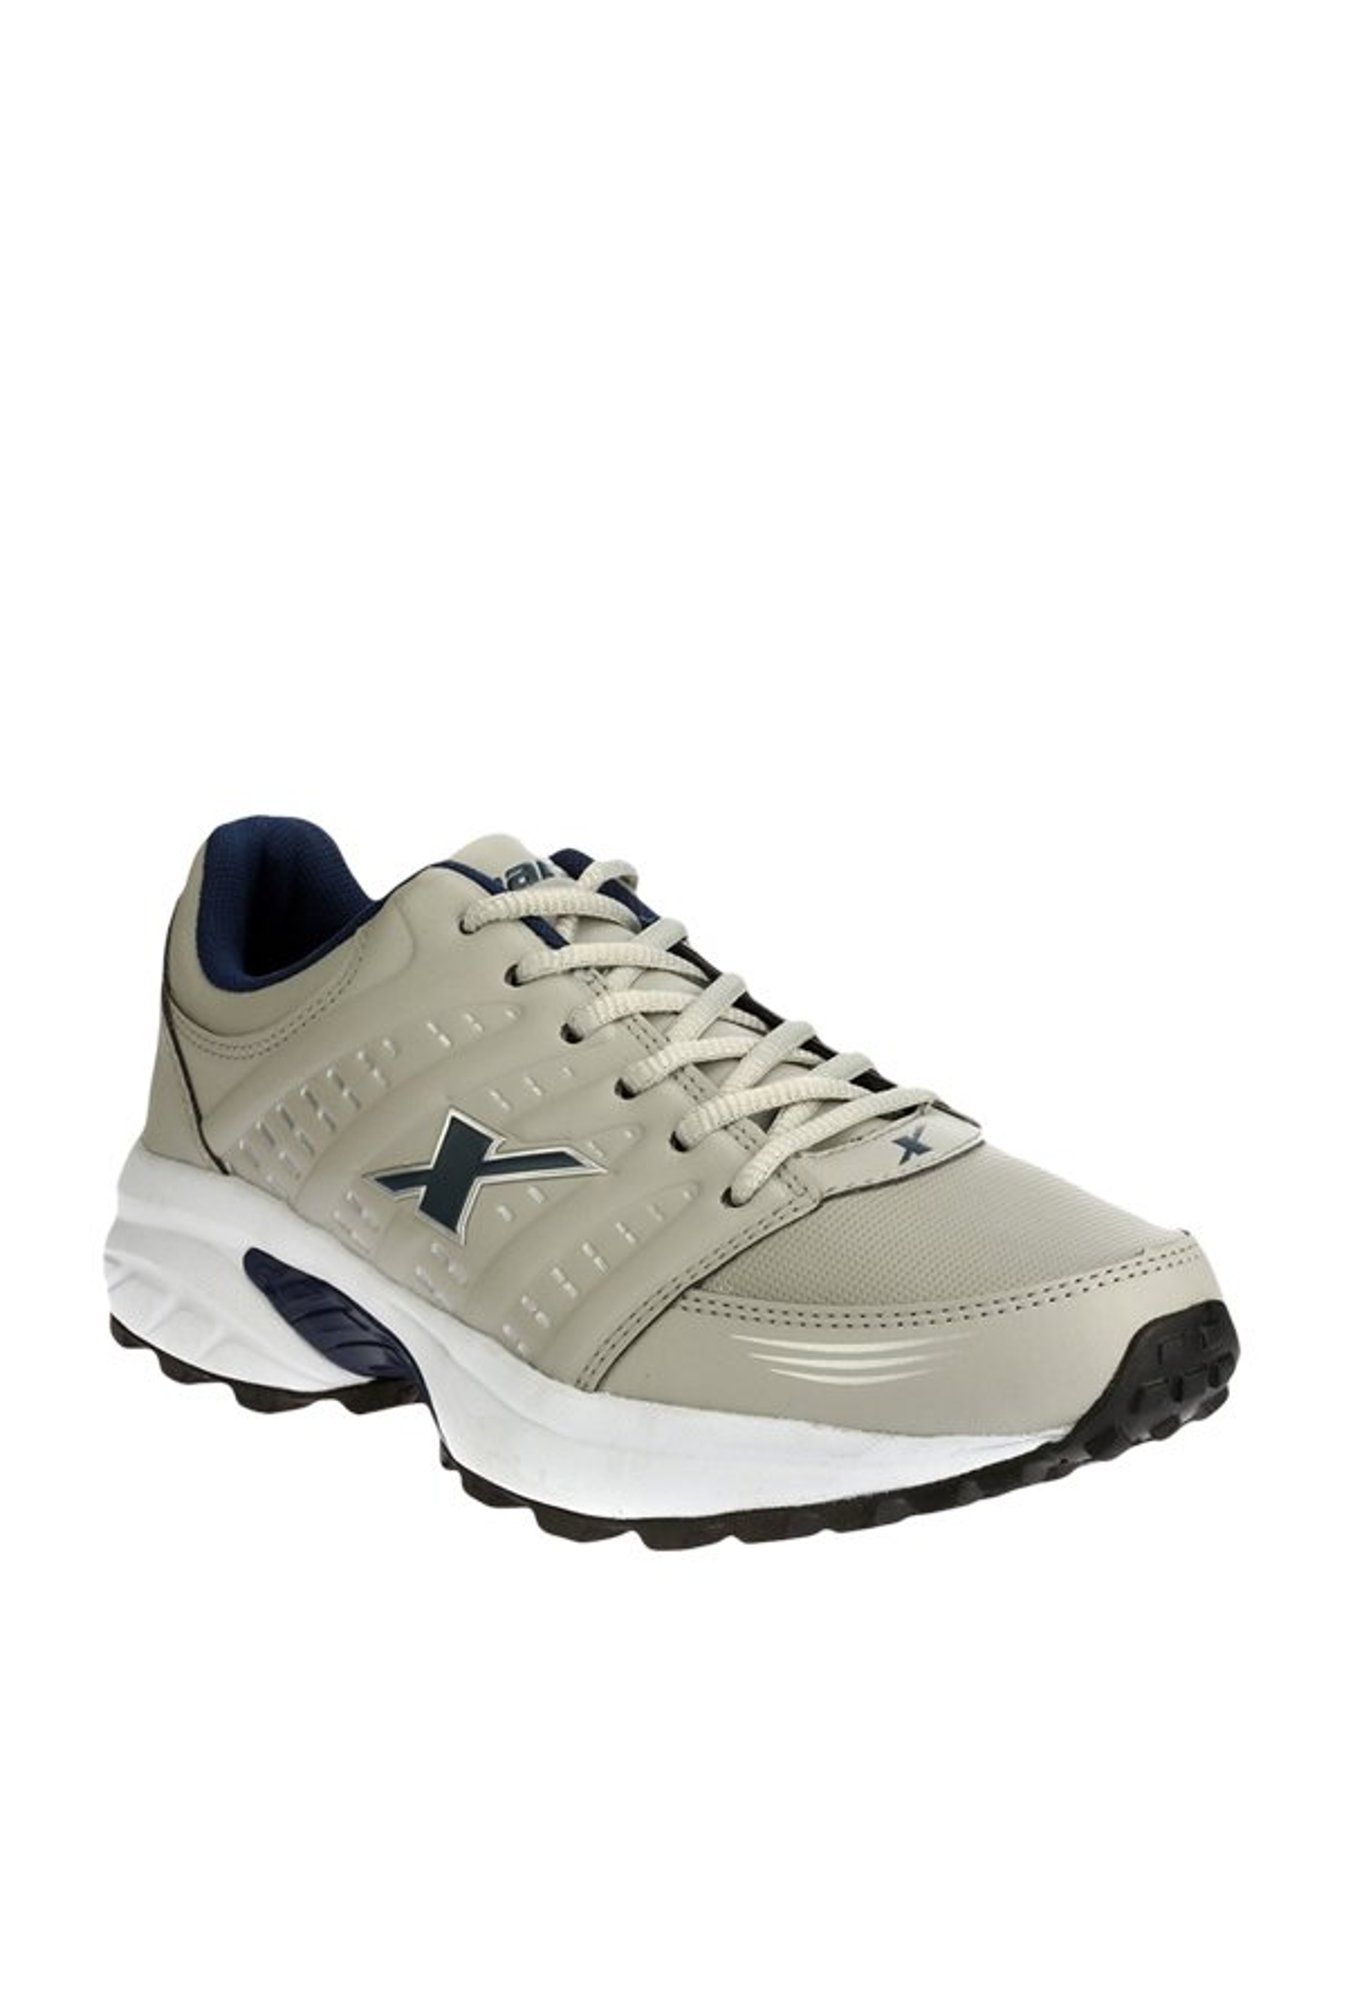 Buy Sparx Grey \u0026 Navy Running Shoes for 